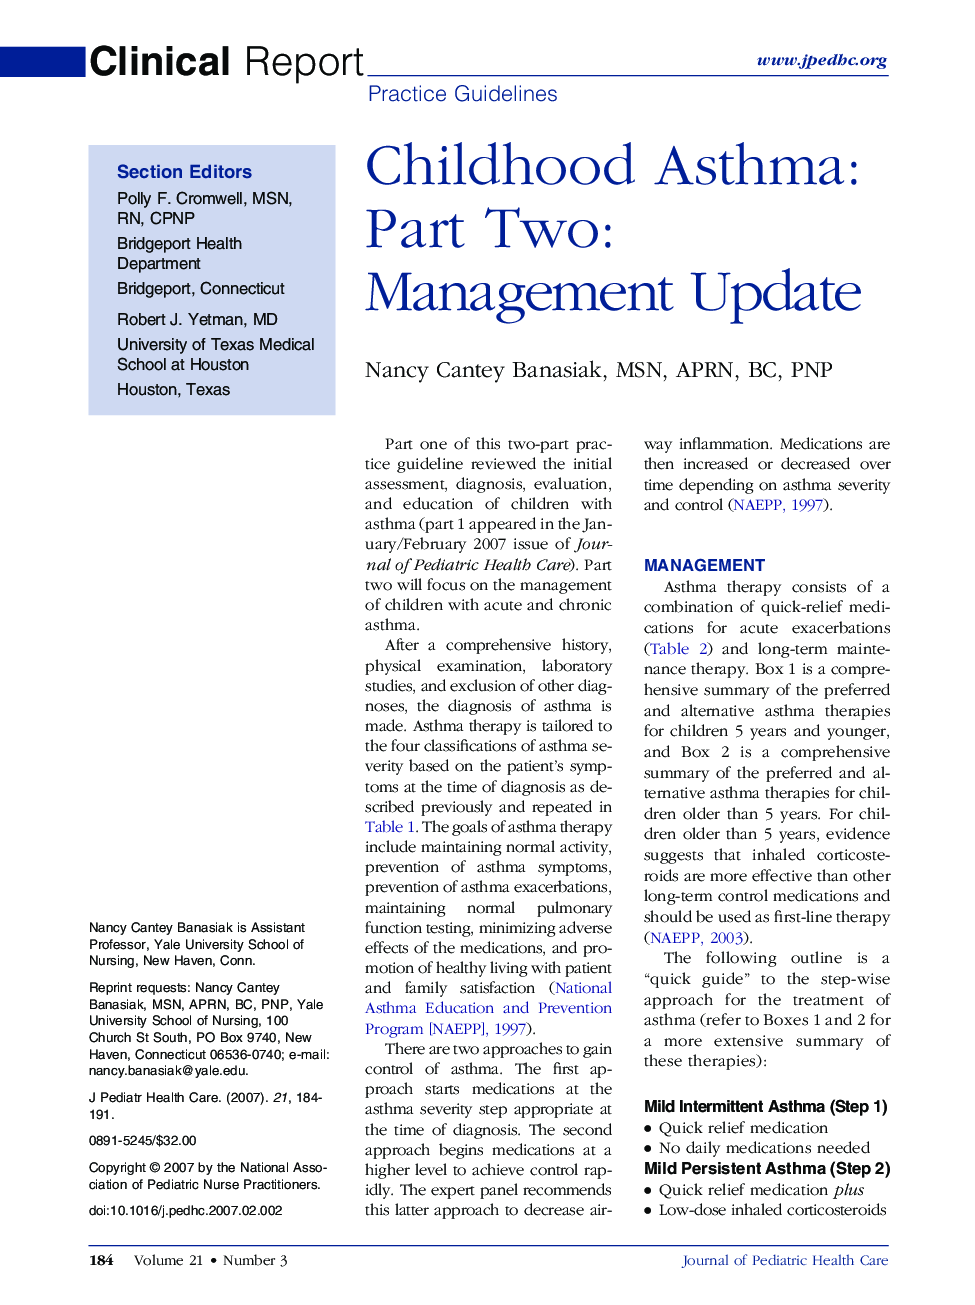 Childhood Asthma: Part Two: Management Update